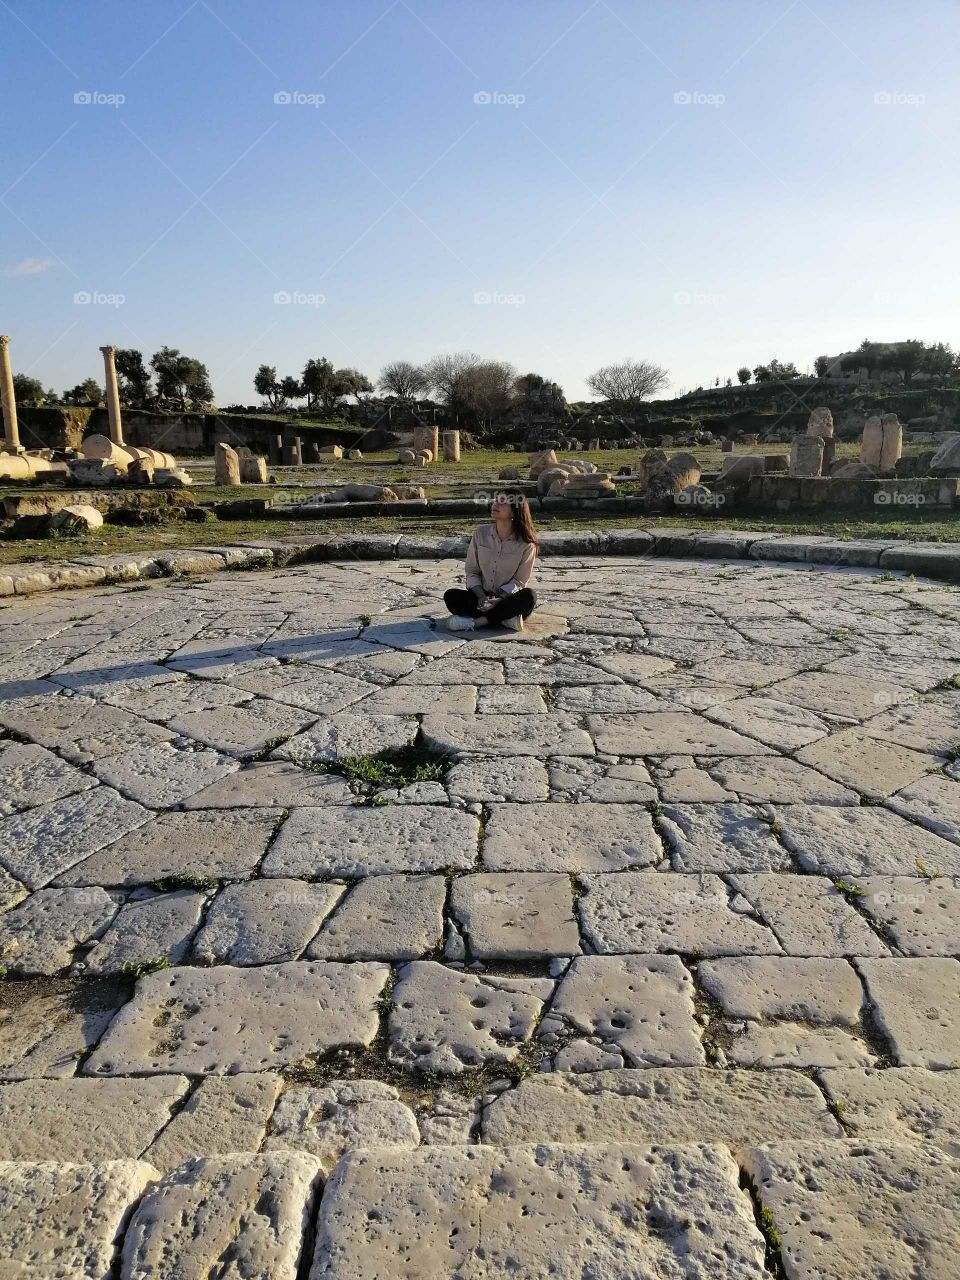 The girl sitting on the stones of the ancient city